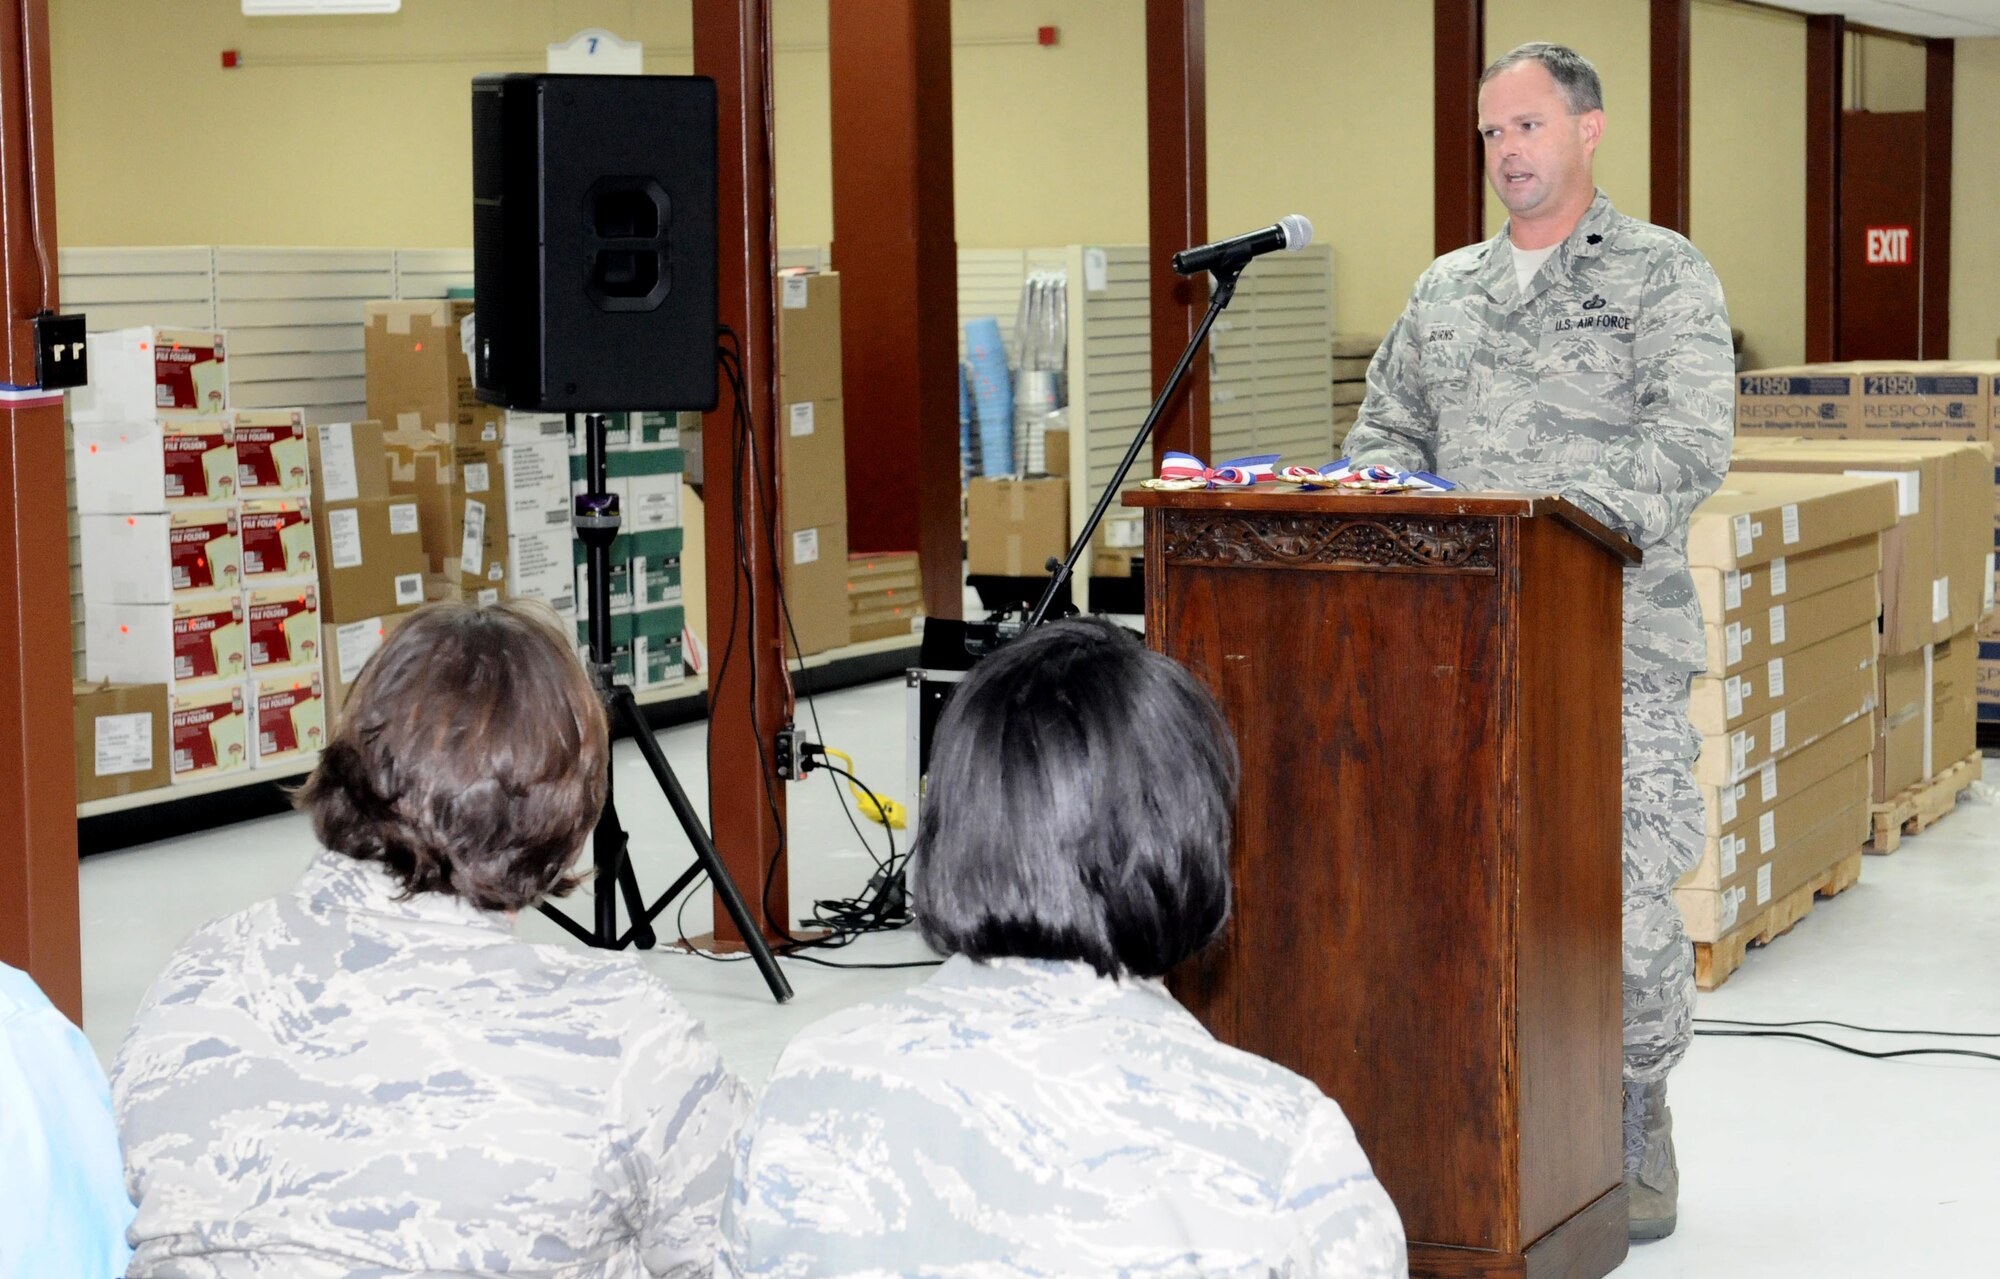 Lt. Col. Robert Burns, 36th Mission Support Group deputy commander, speaks at the ServMart grand opening here July 26. The ServMart carries more than 800 supplies to help military organizations complete mission requirements. (U.S. Air Force photo/Airman 1st Class Mariah Haddenham/Released)